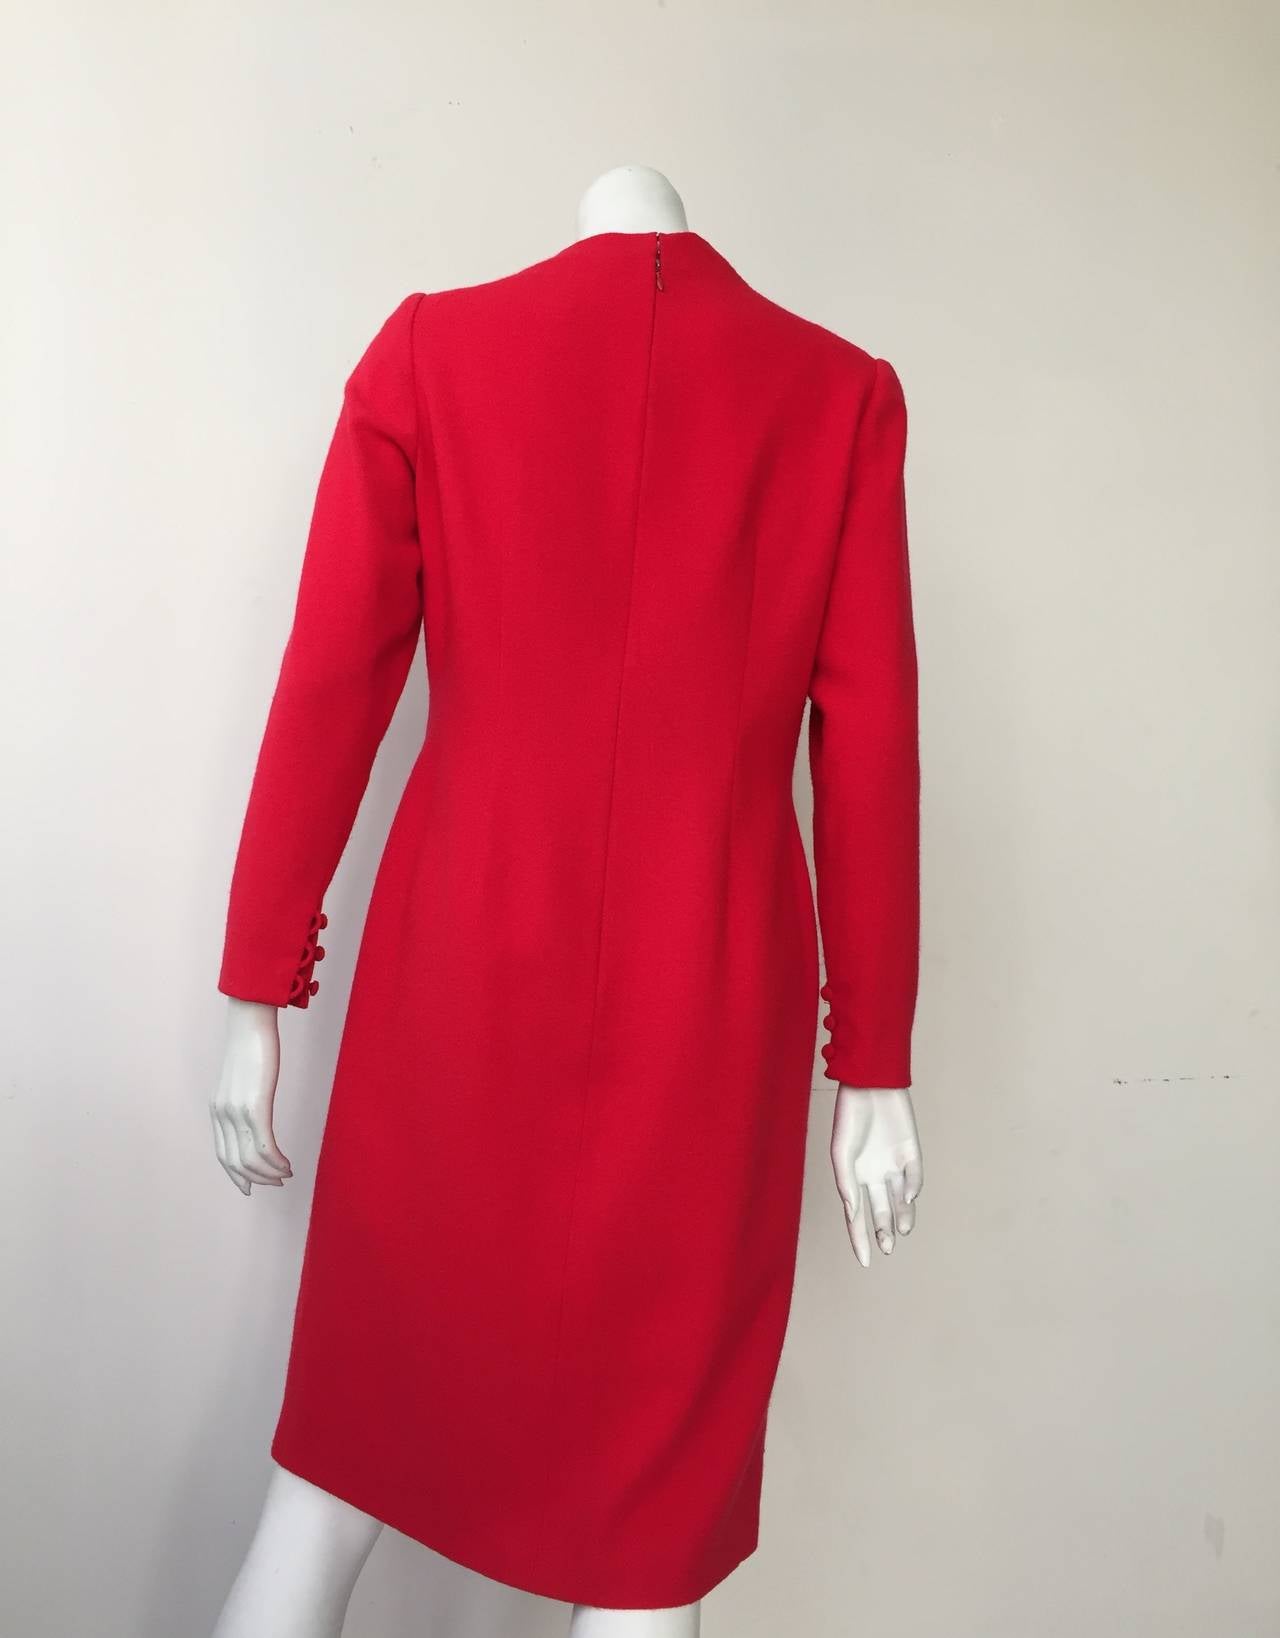 Bill Blass 70s Red Wool Dress Size 12. For Sale at 1stdibs